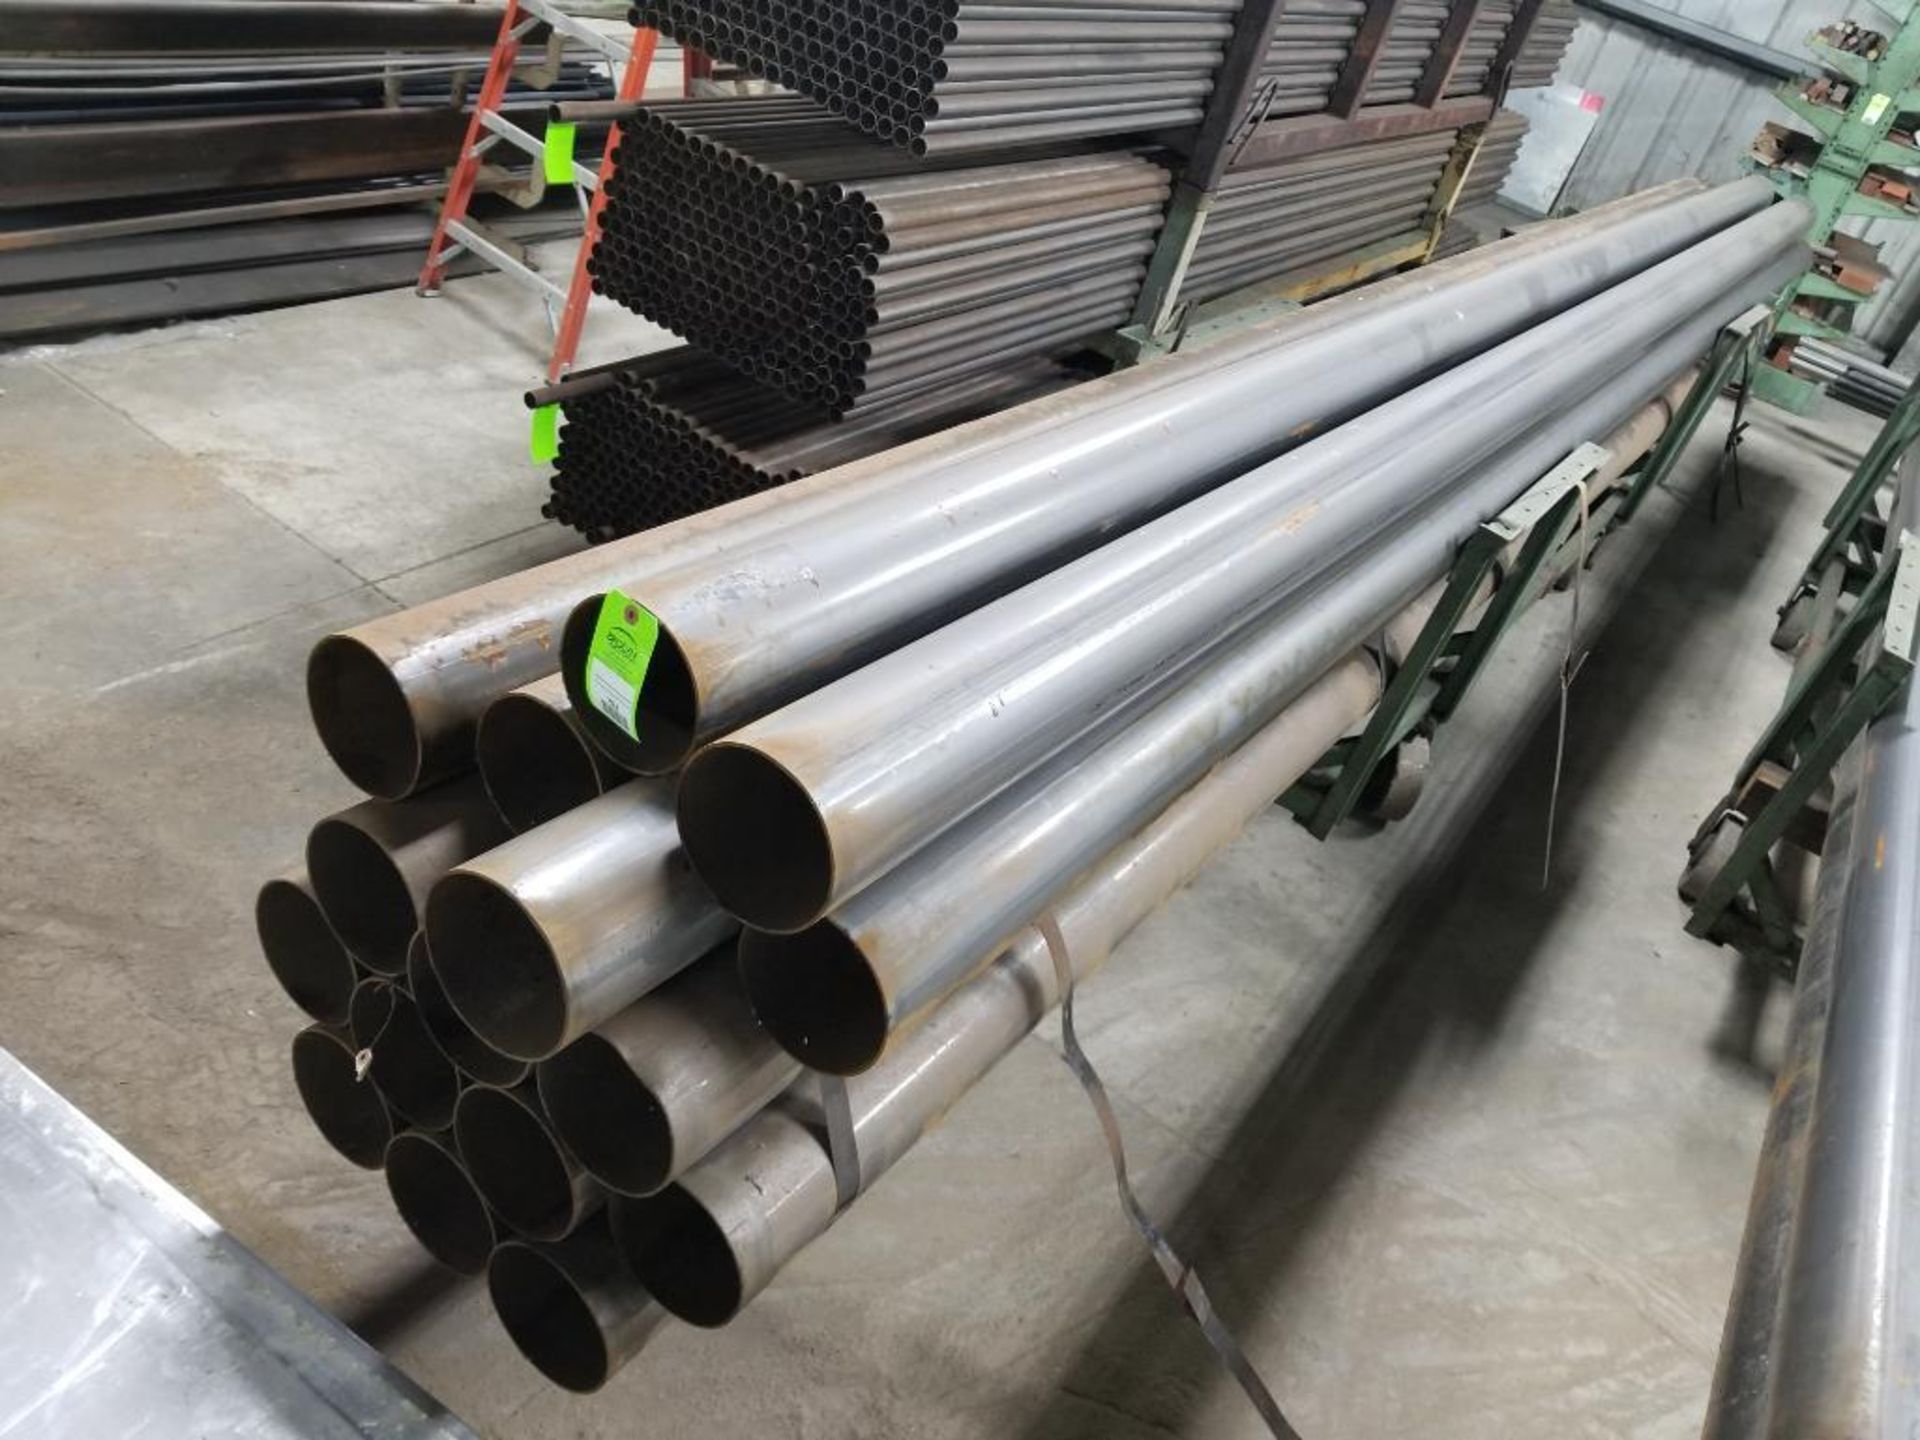 Large qty of steel tube stock as pictured in one section.